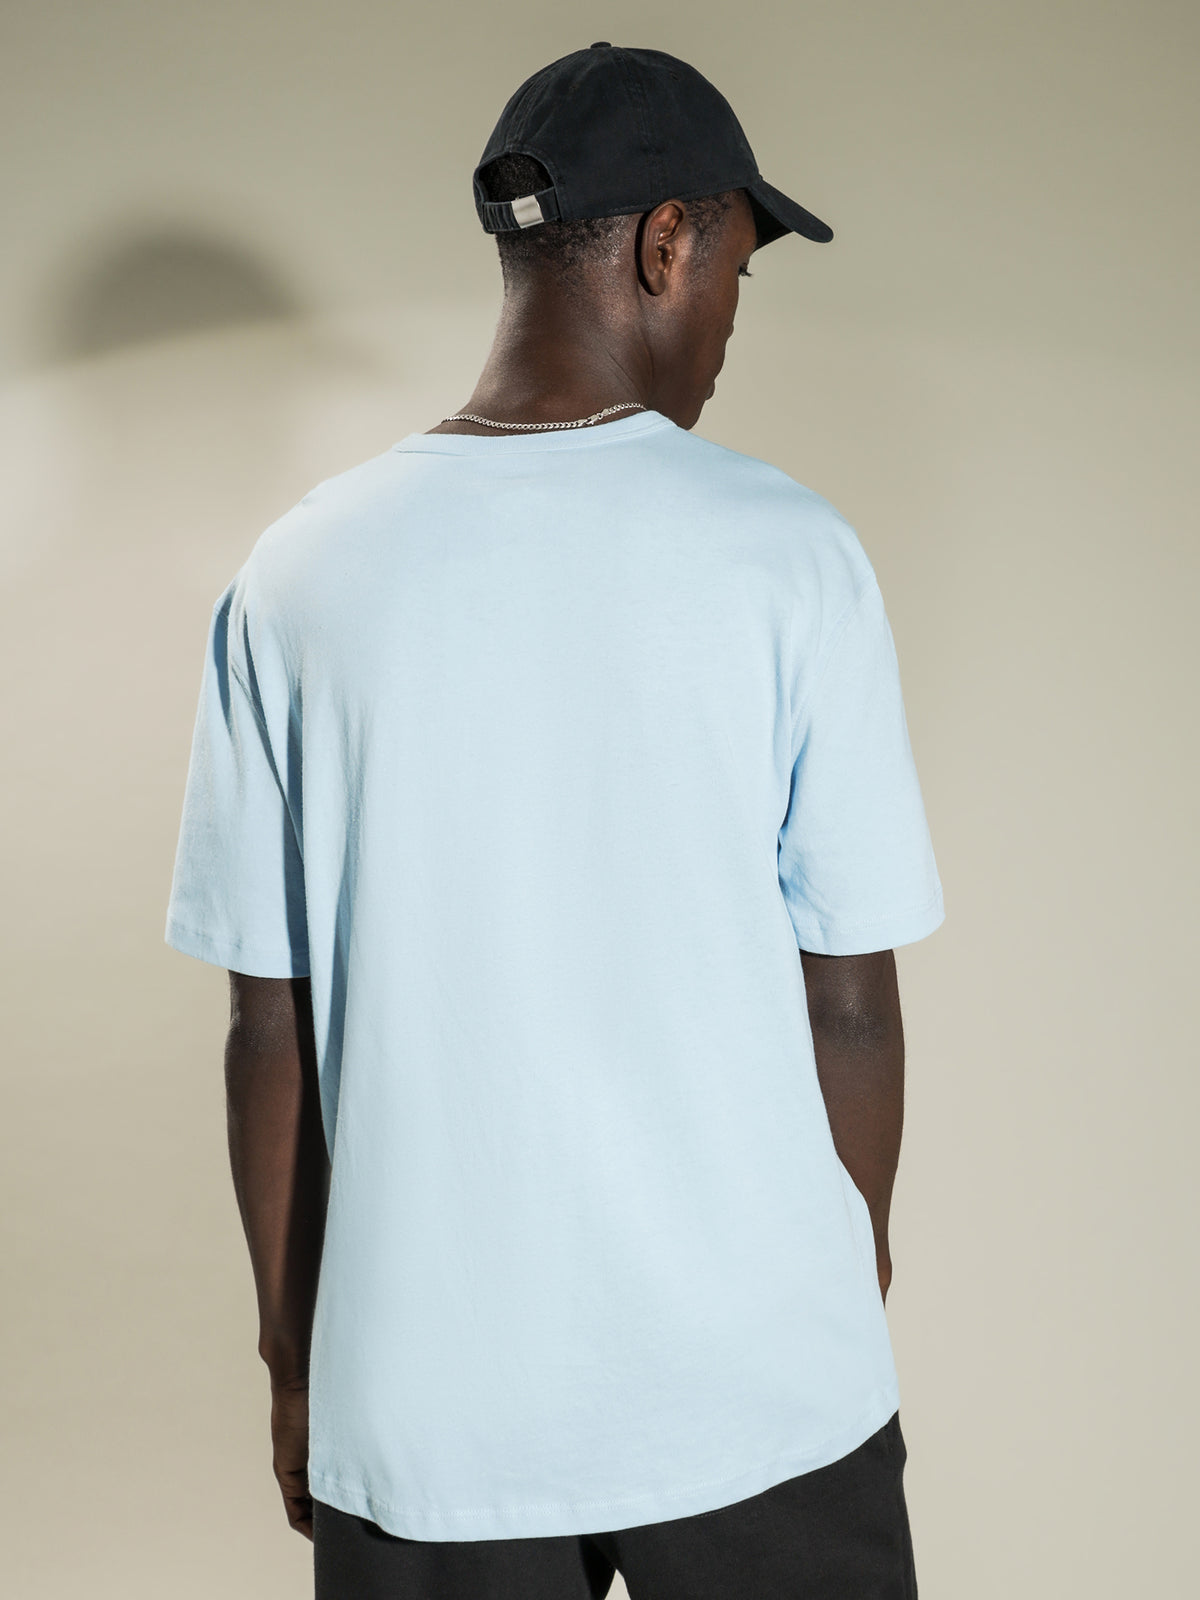 Re:bound Light T-Shirt in Candid Blue